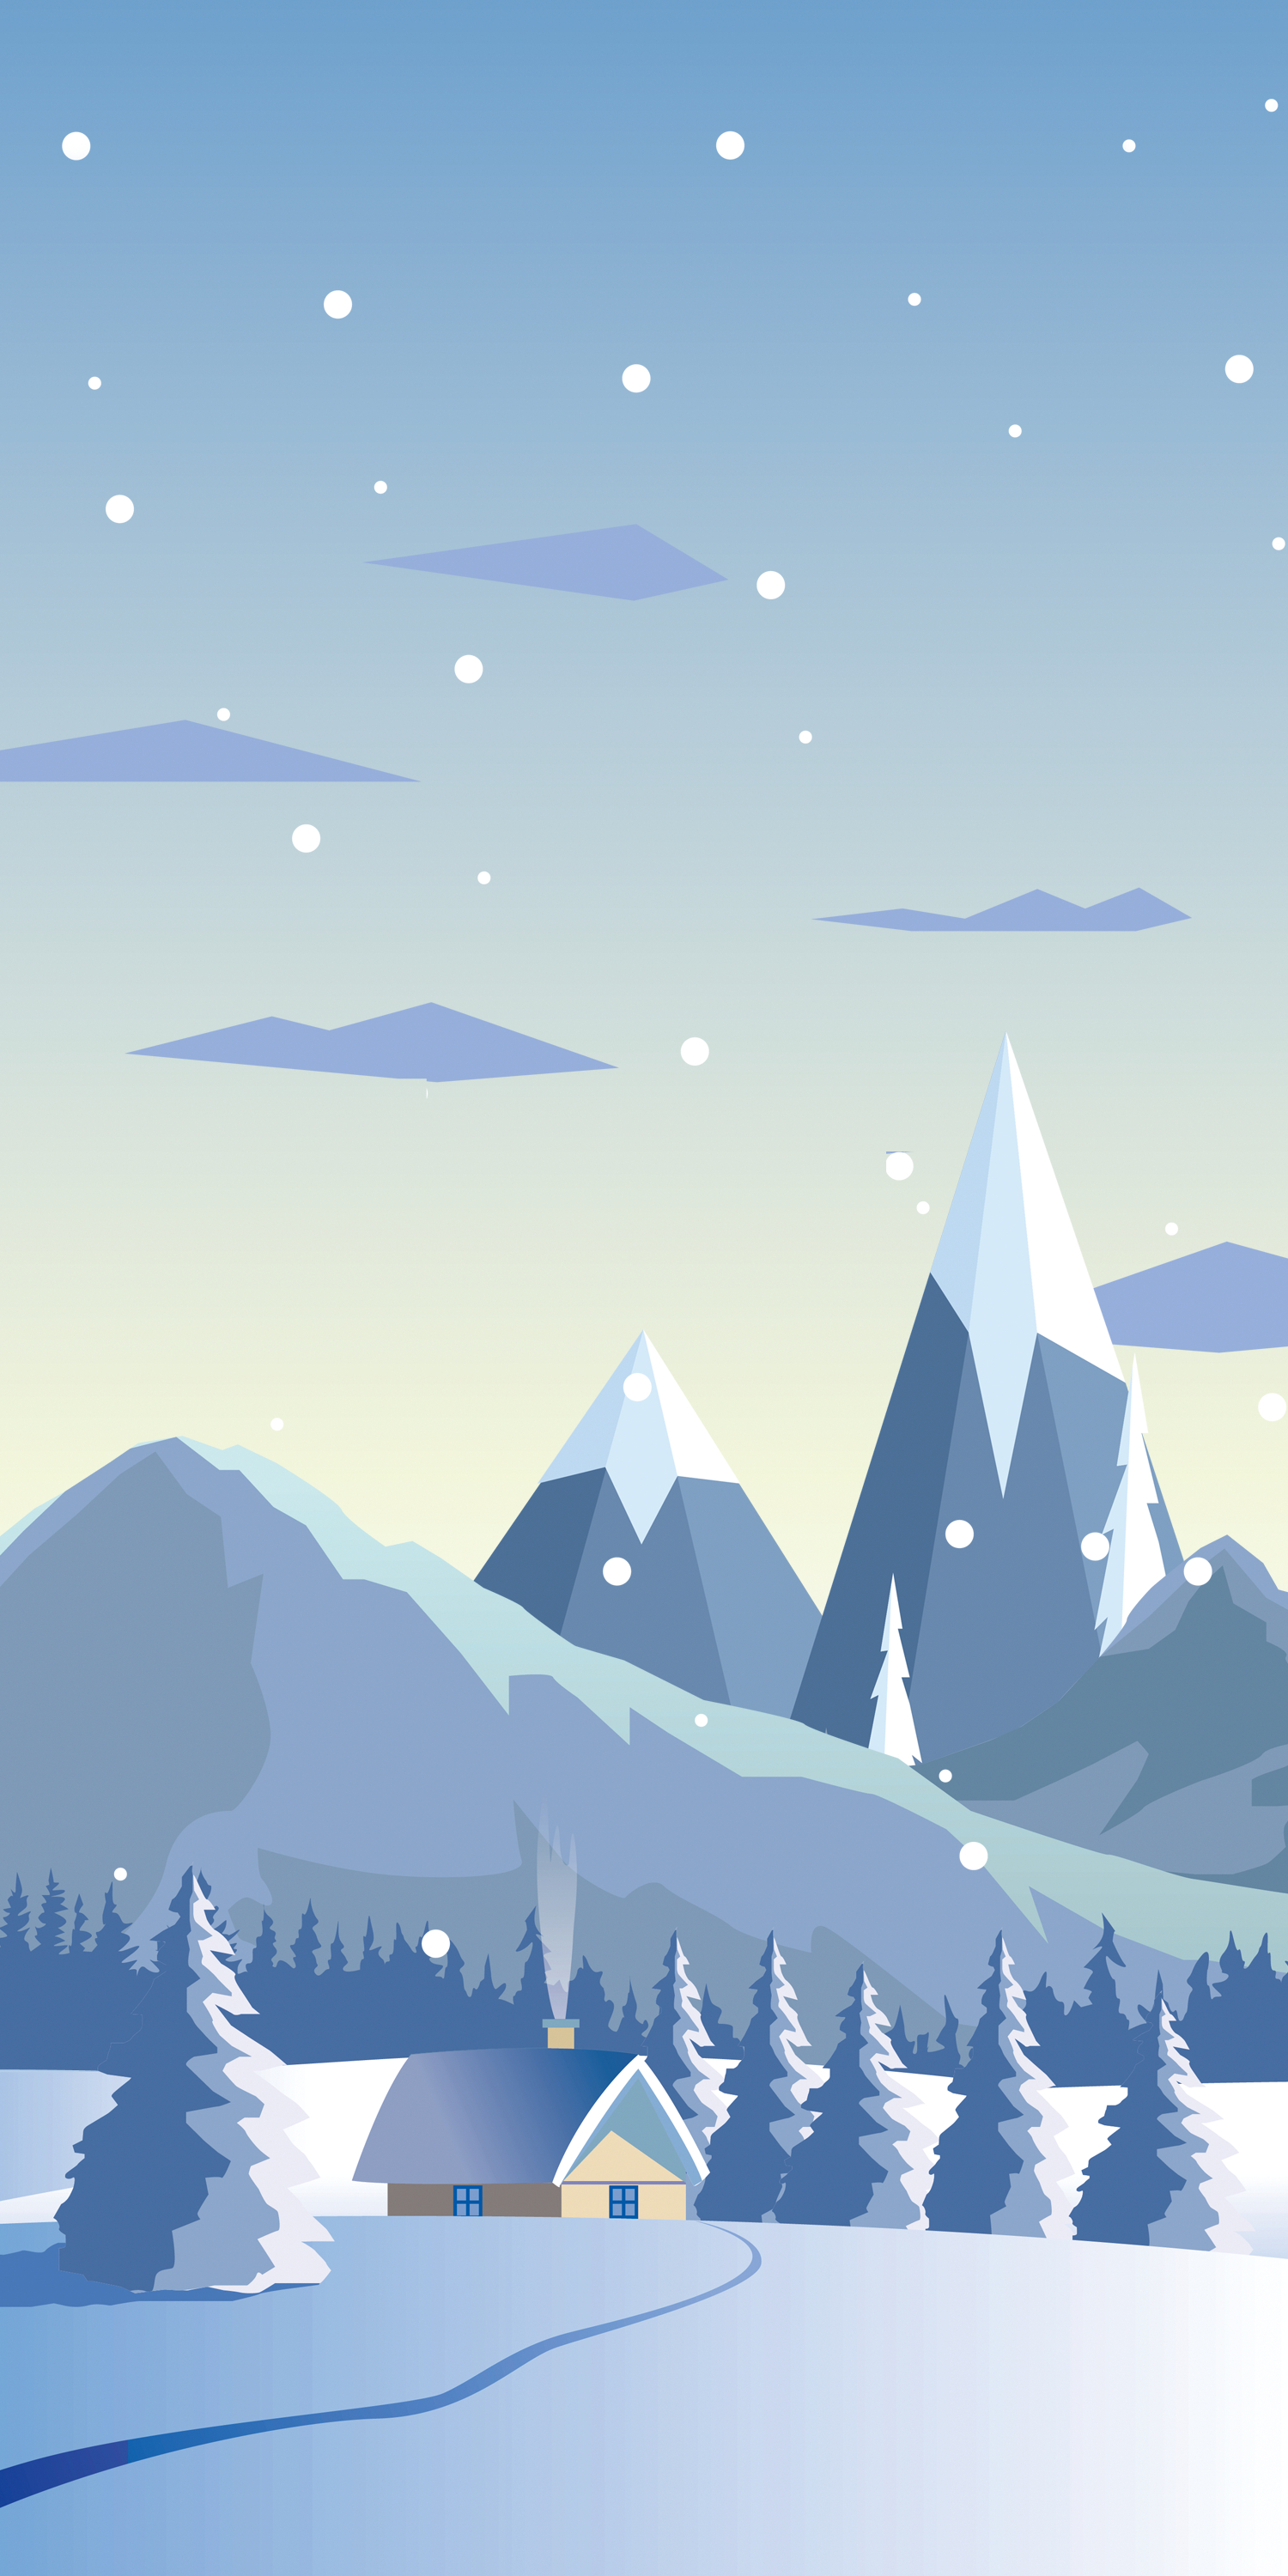 1500x3000 Snowy wallpaper illustrations for iPhone | Iphone wallpaper winter, Minimalist wallpaper, Graphic wallpaper